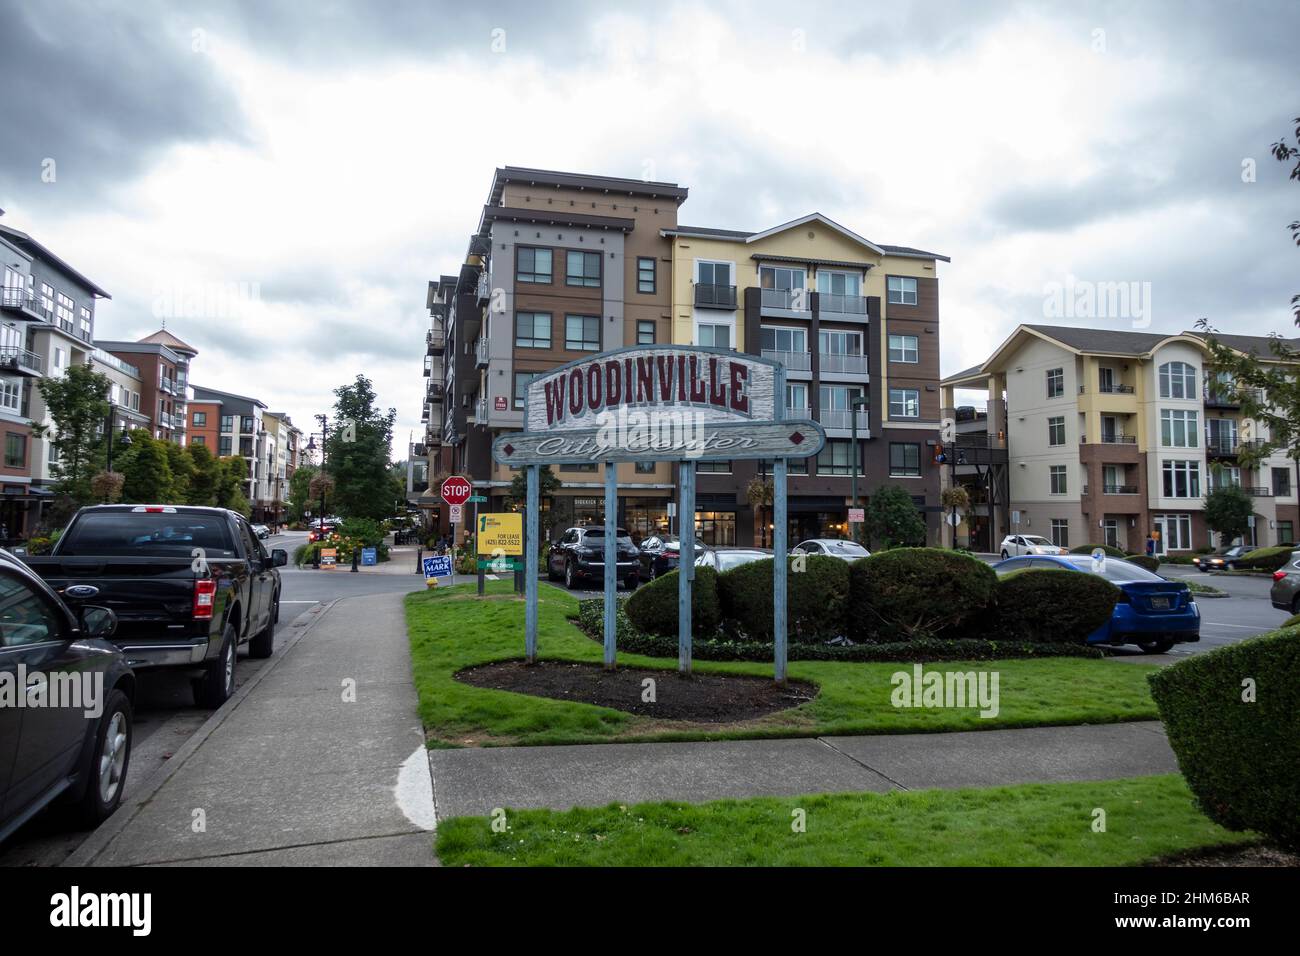 Woodinville, WA USA - circa September 2021: Street view of the Woodinville city center sign outside of a major shopping area on a cloudy, overcast day Stock Photo